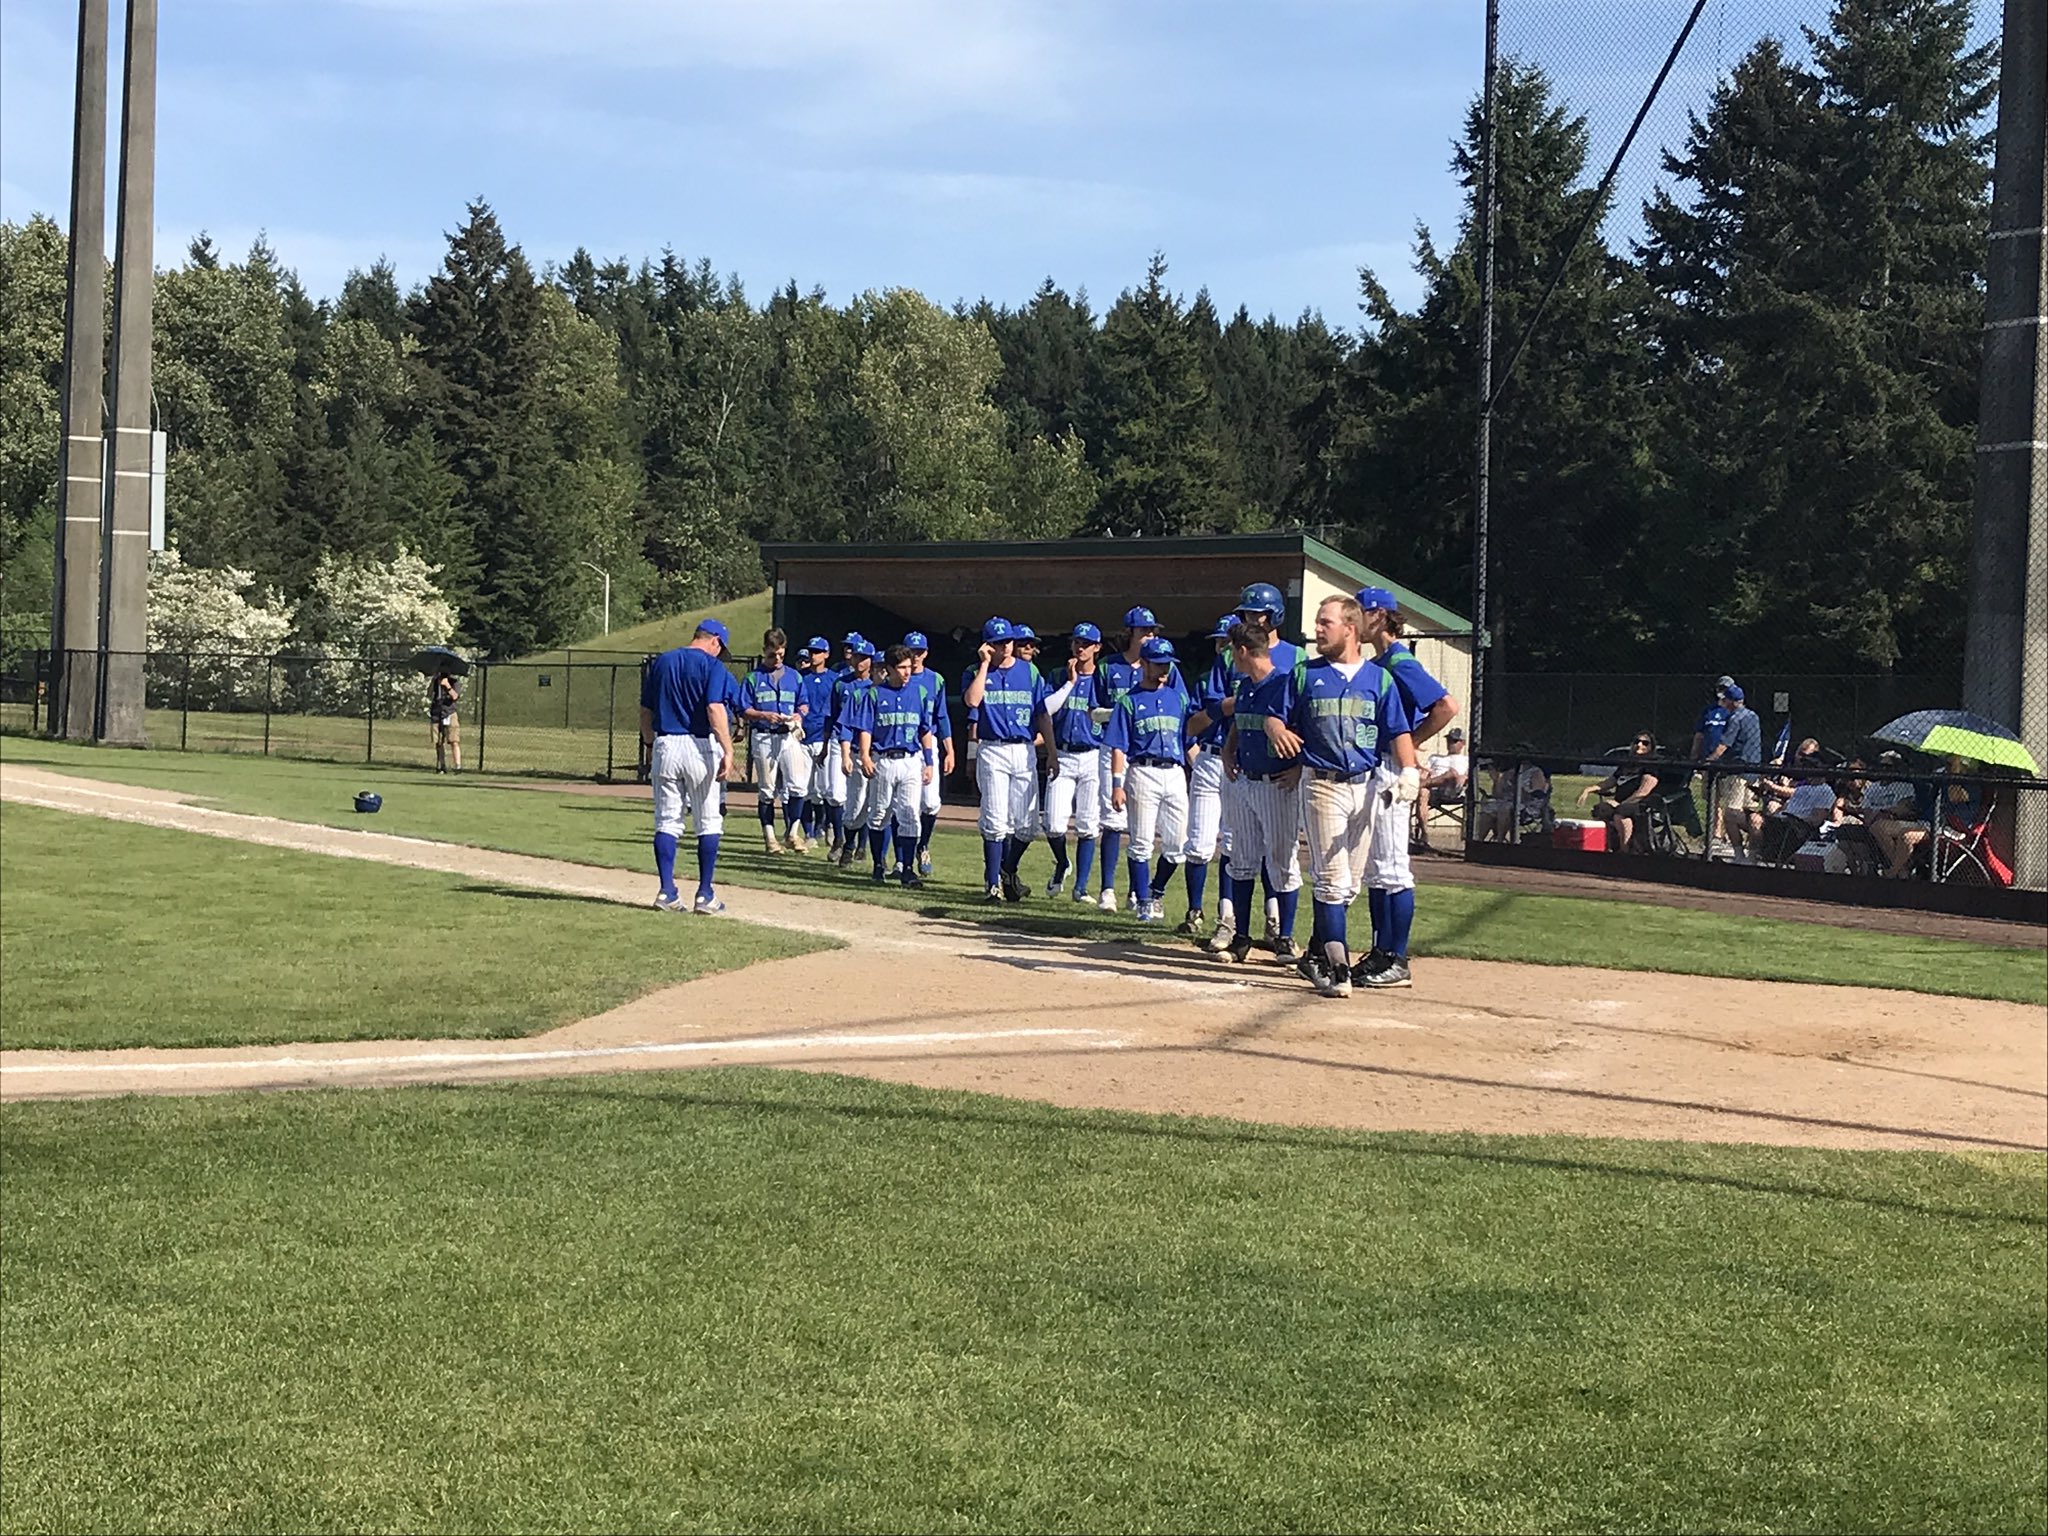 The Mountain View baseball team prepares to greet Gig Harbor after the Thunder fell 8-3 to the Tides in the 3A bi-district baseball game (Meg Wochnick/The Columbian)